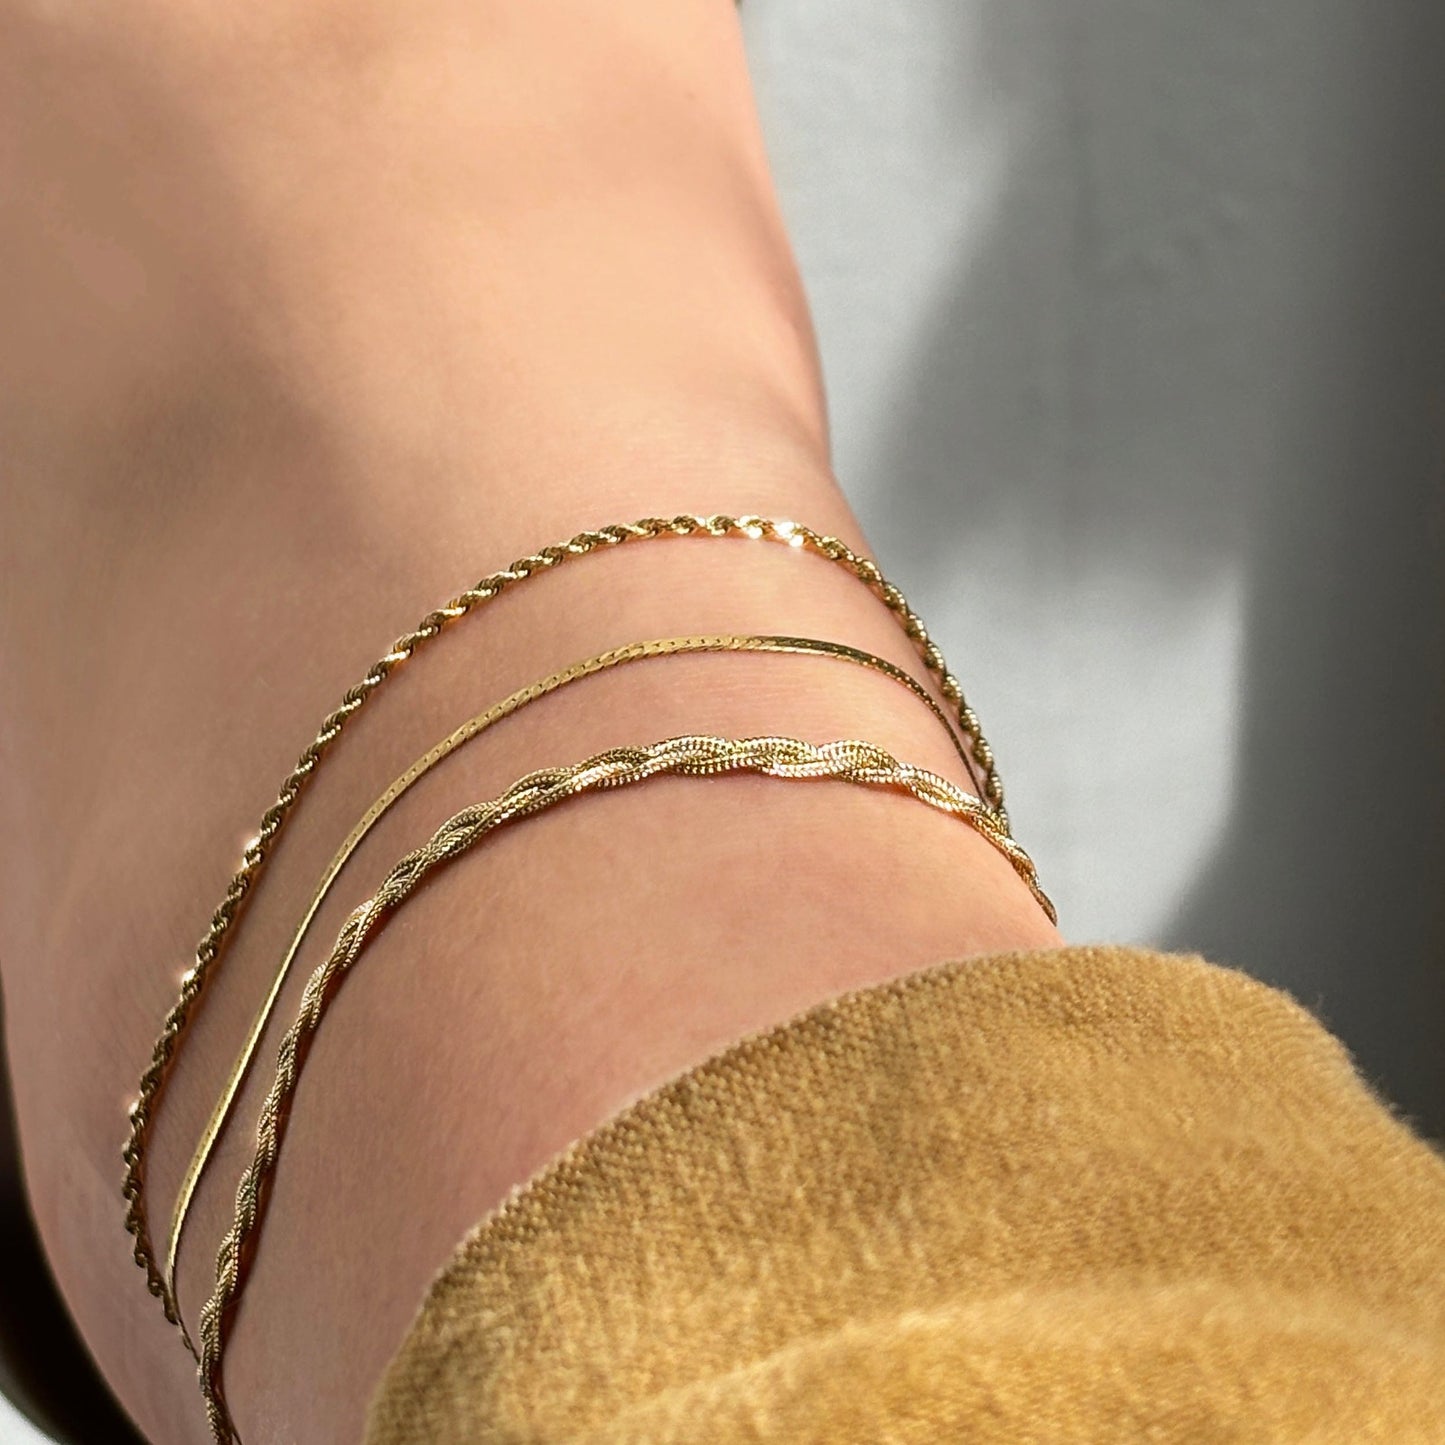 14k gold Braided Fox Chain Anklet styled on an ankle